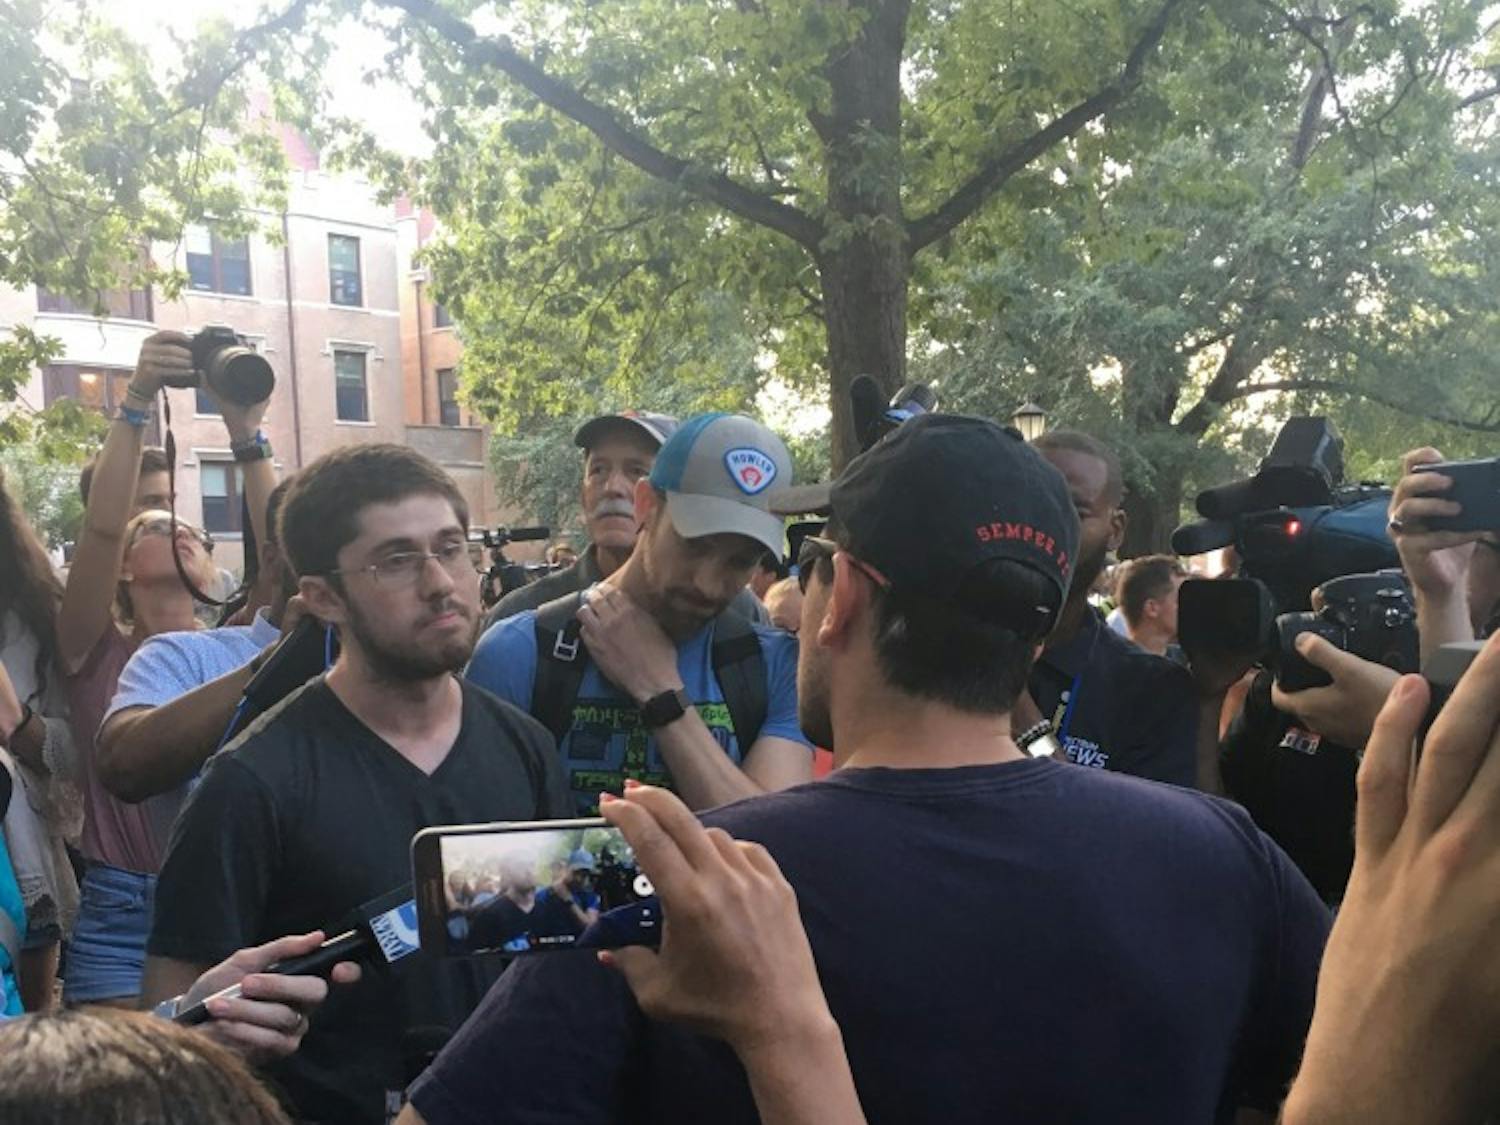 Protestors are interviewed during a rally at Silent Sam.